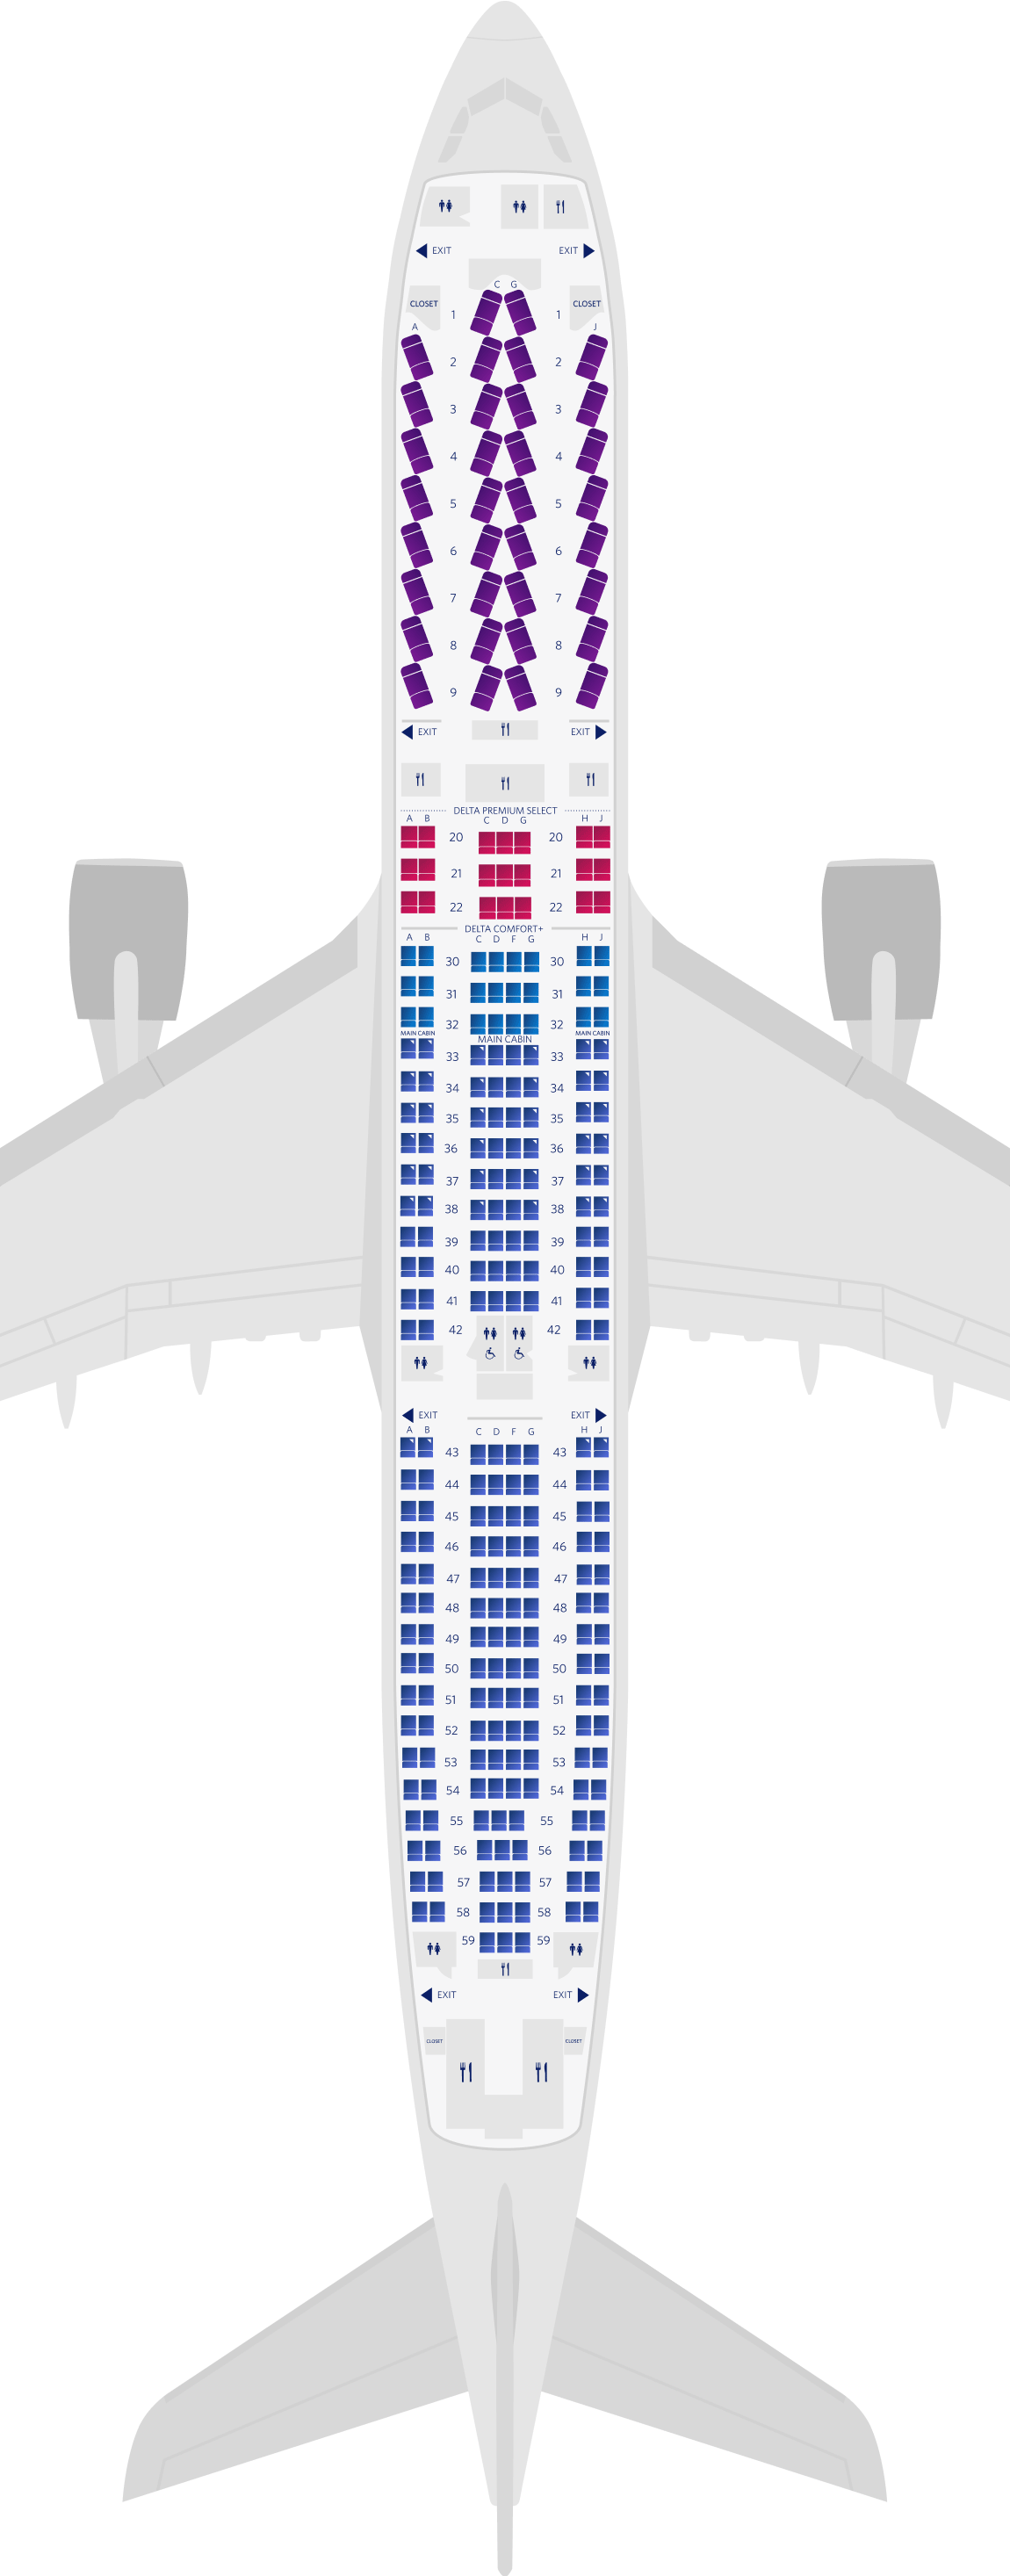 Airbus A330-300 4-Cabin Seat Map (3M3)